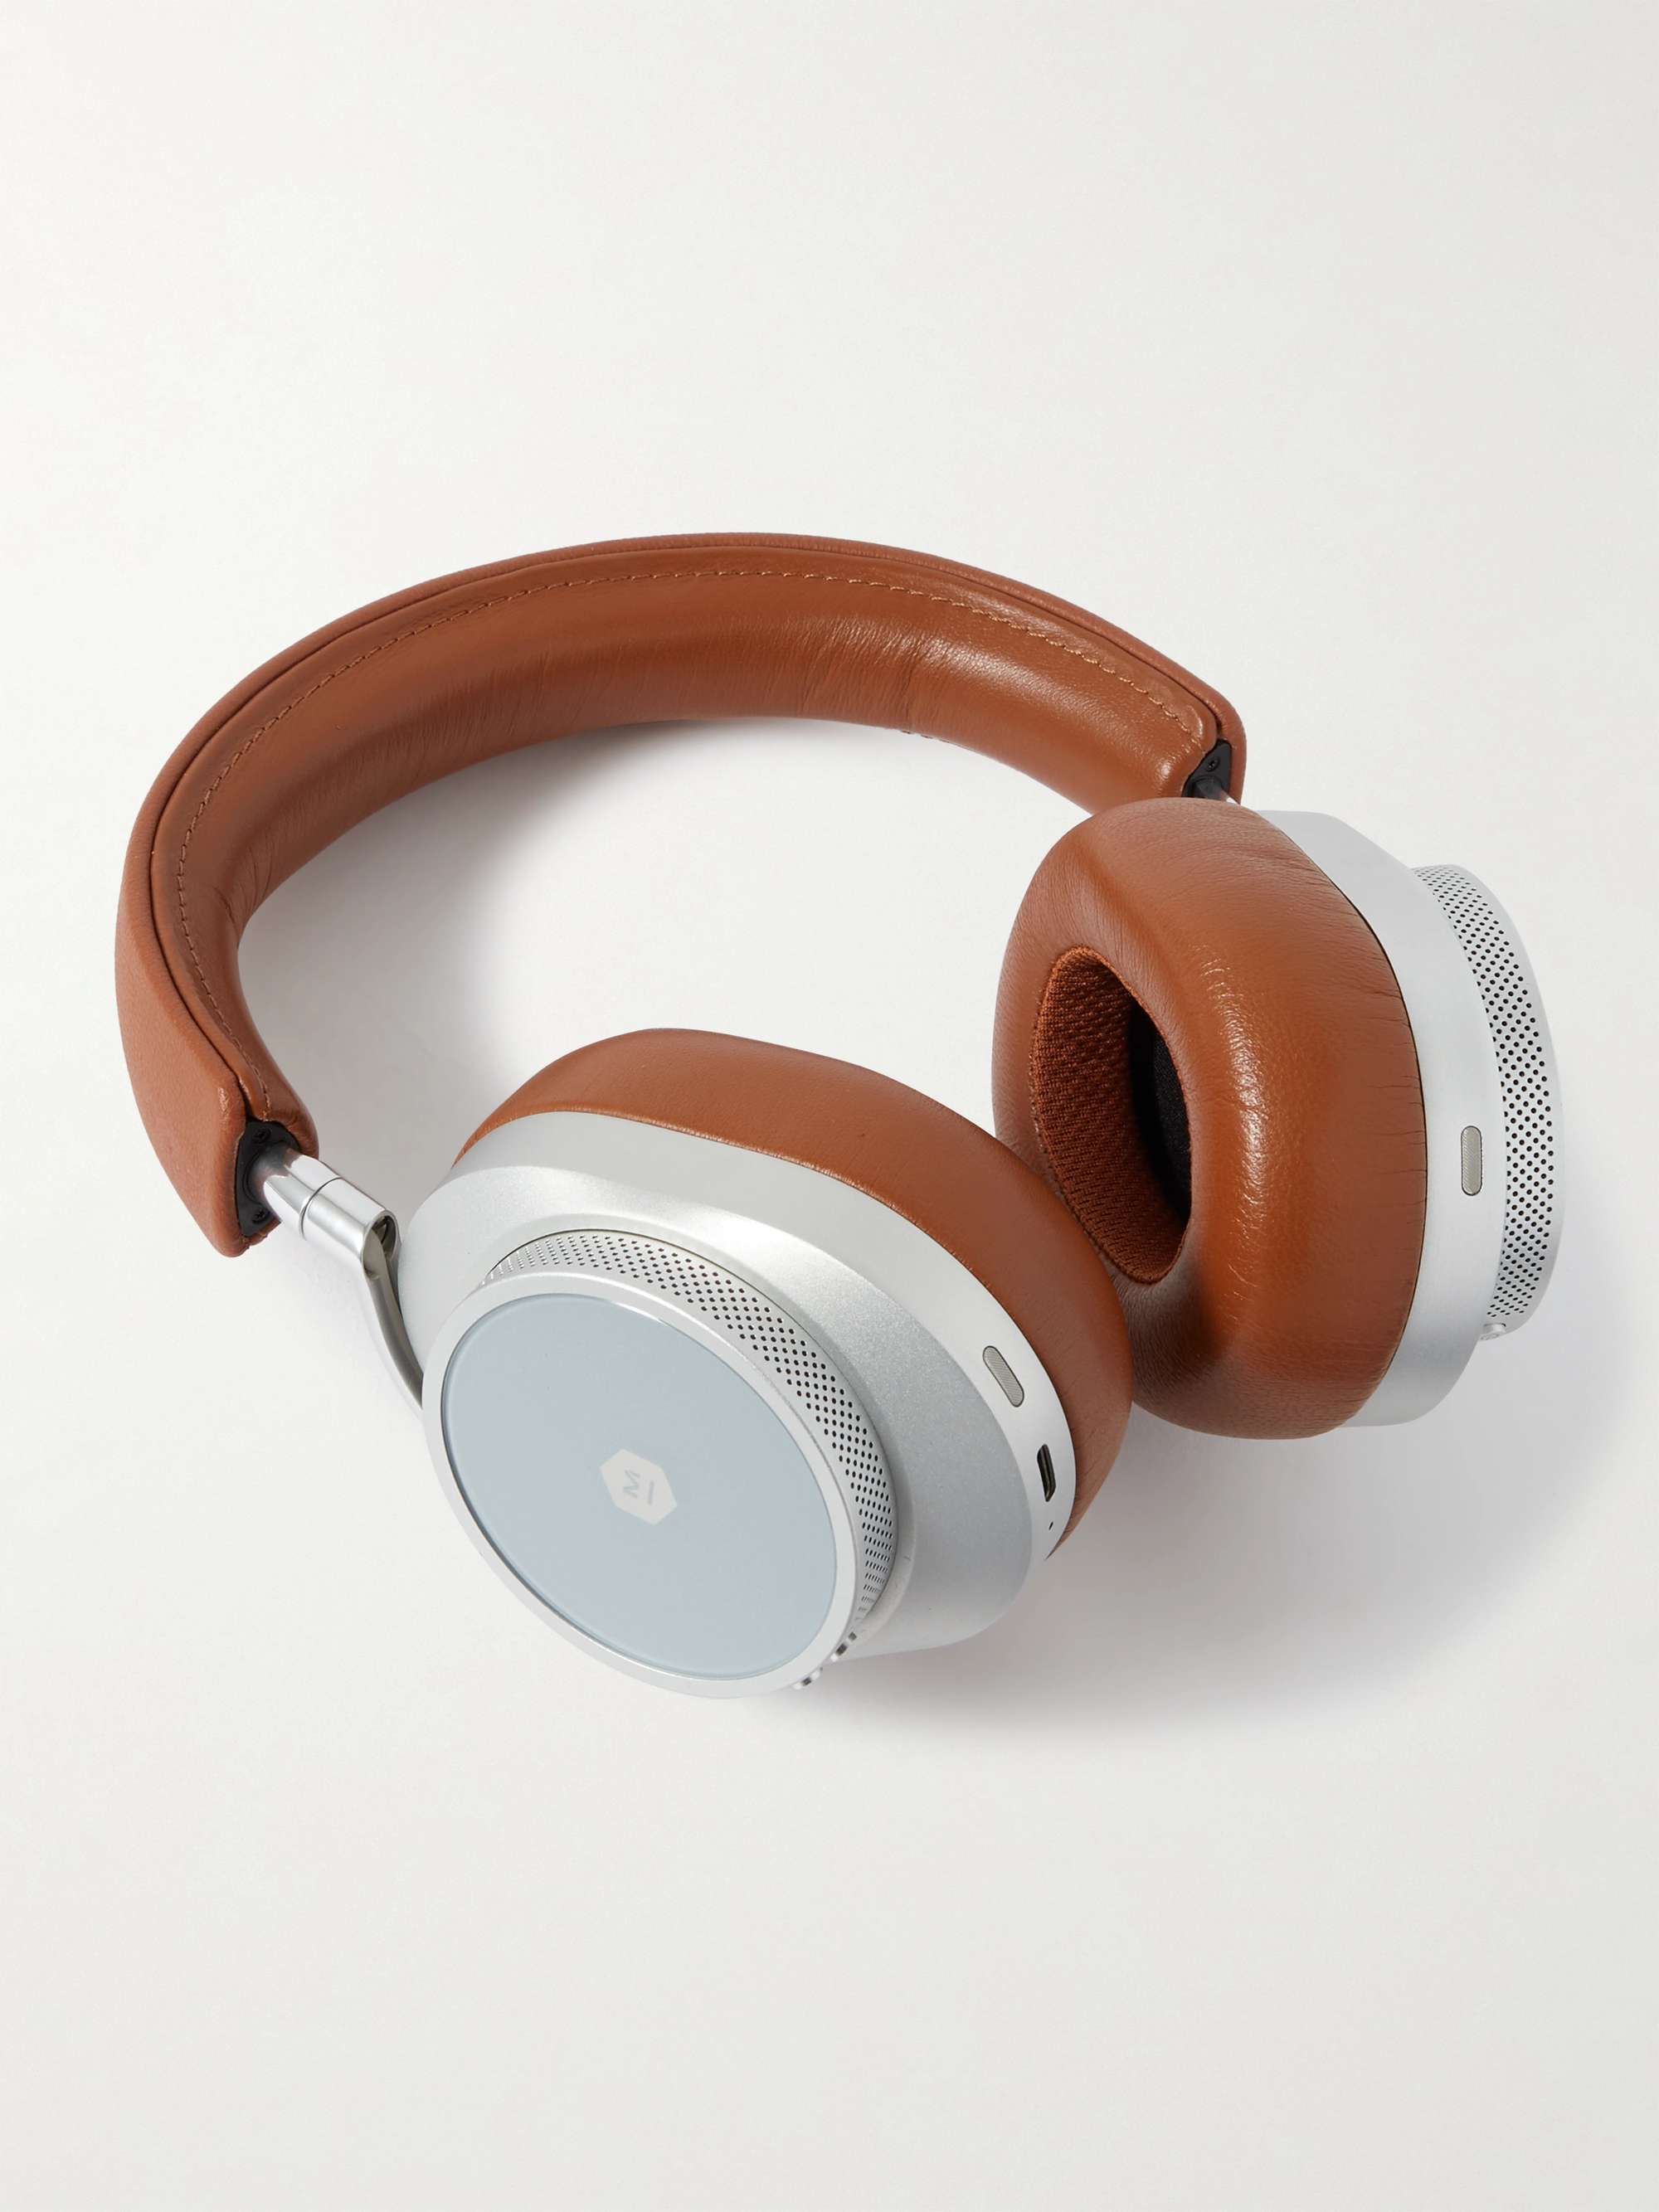 MASTER & DYNAMIC MW75 Wireless Leather Over-Ear Headphones